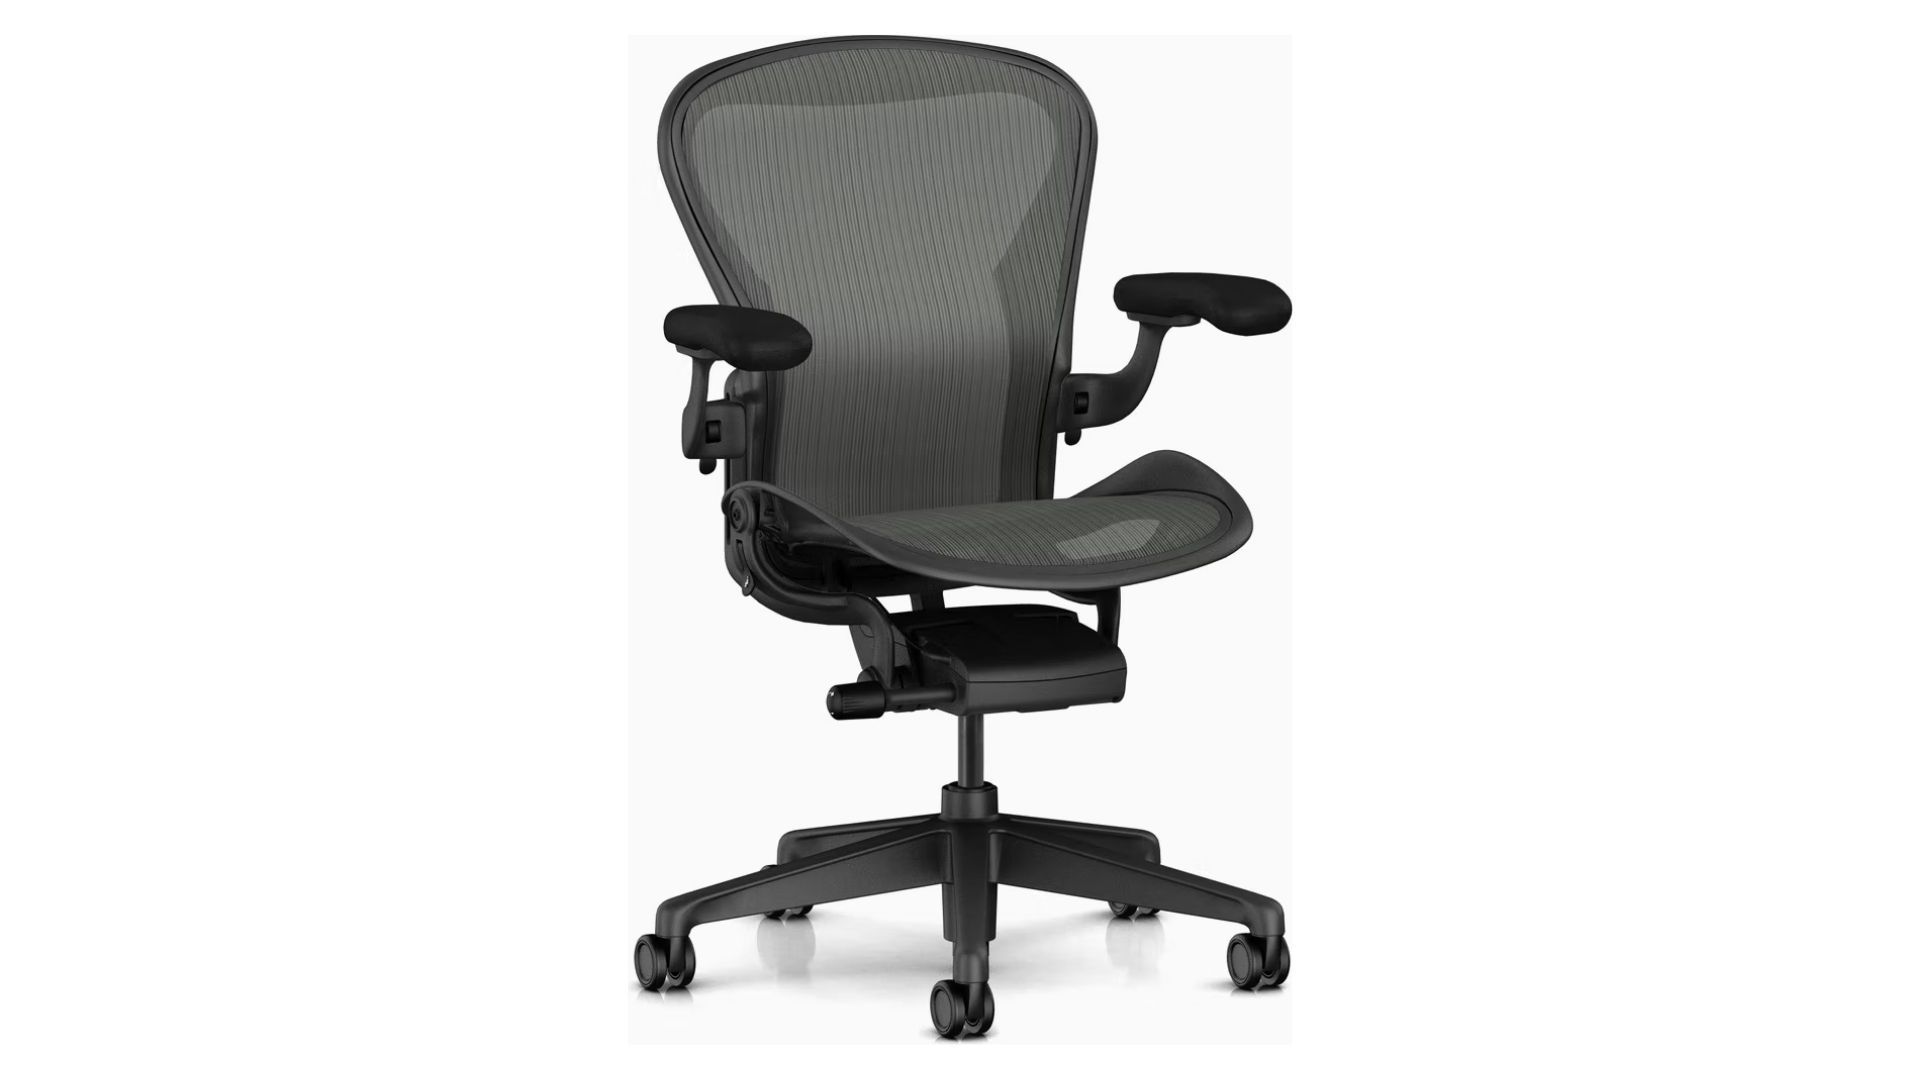 The ergonomic Aeron chair from Herman Miller with mesh all over.